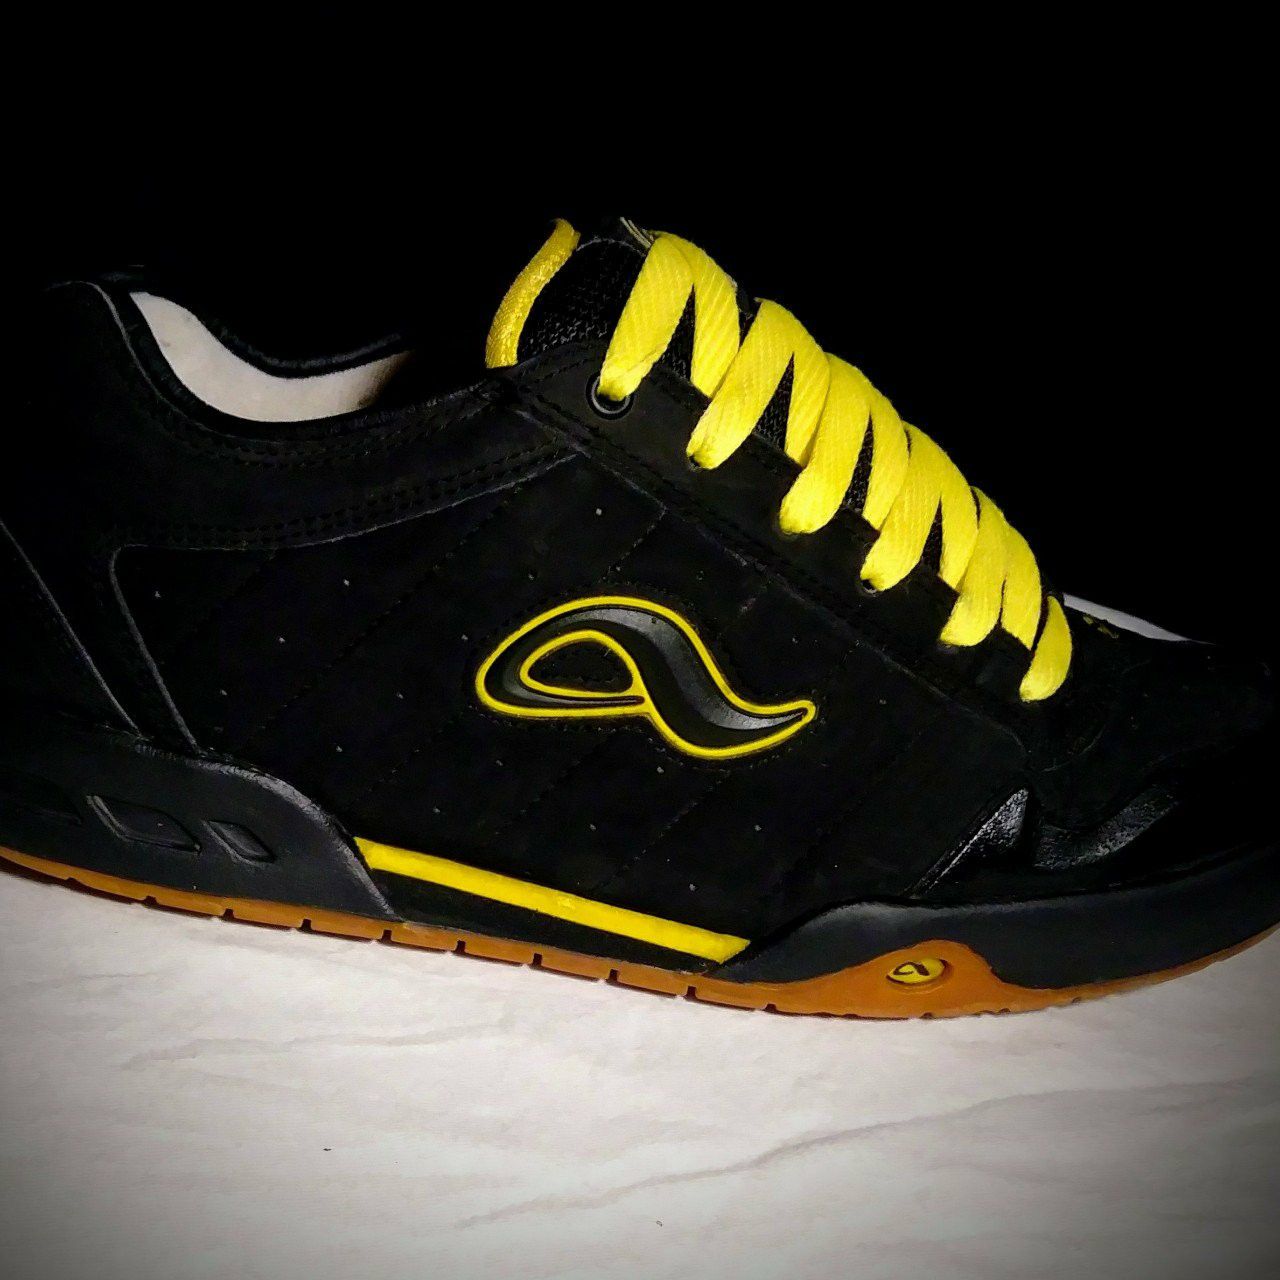 Adio Kenny Anderson V1 sz11 (Custom Colorway, Very Rare) for Sale in  Henderson, CO - OfferUp